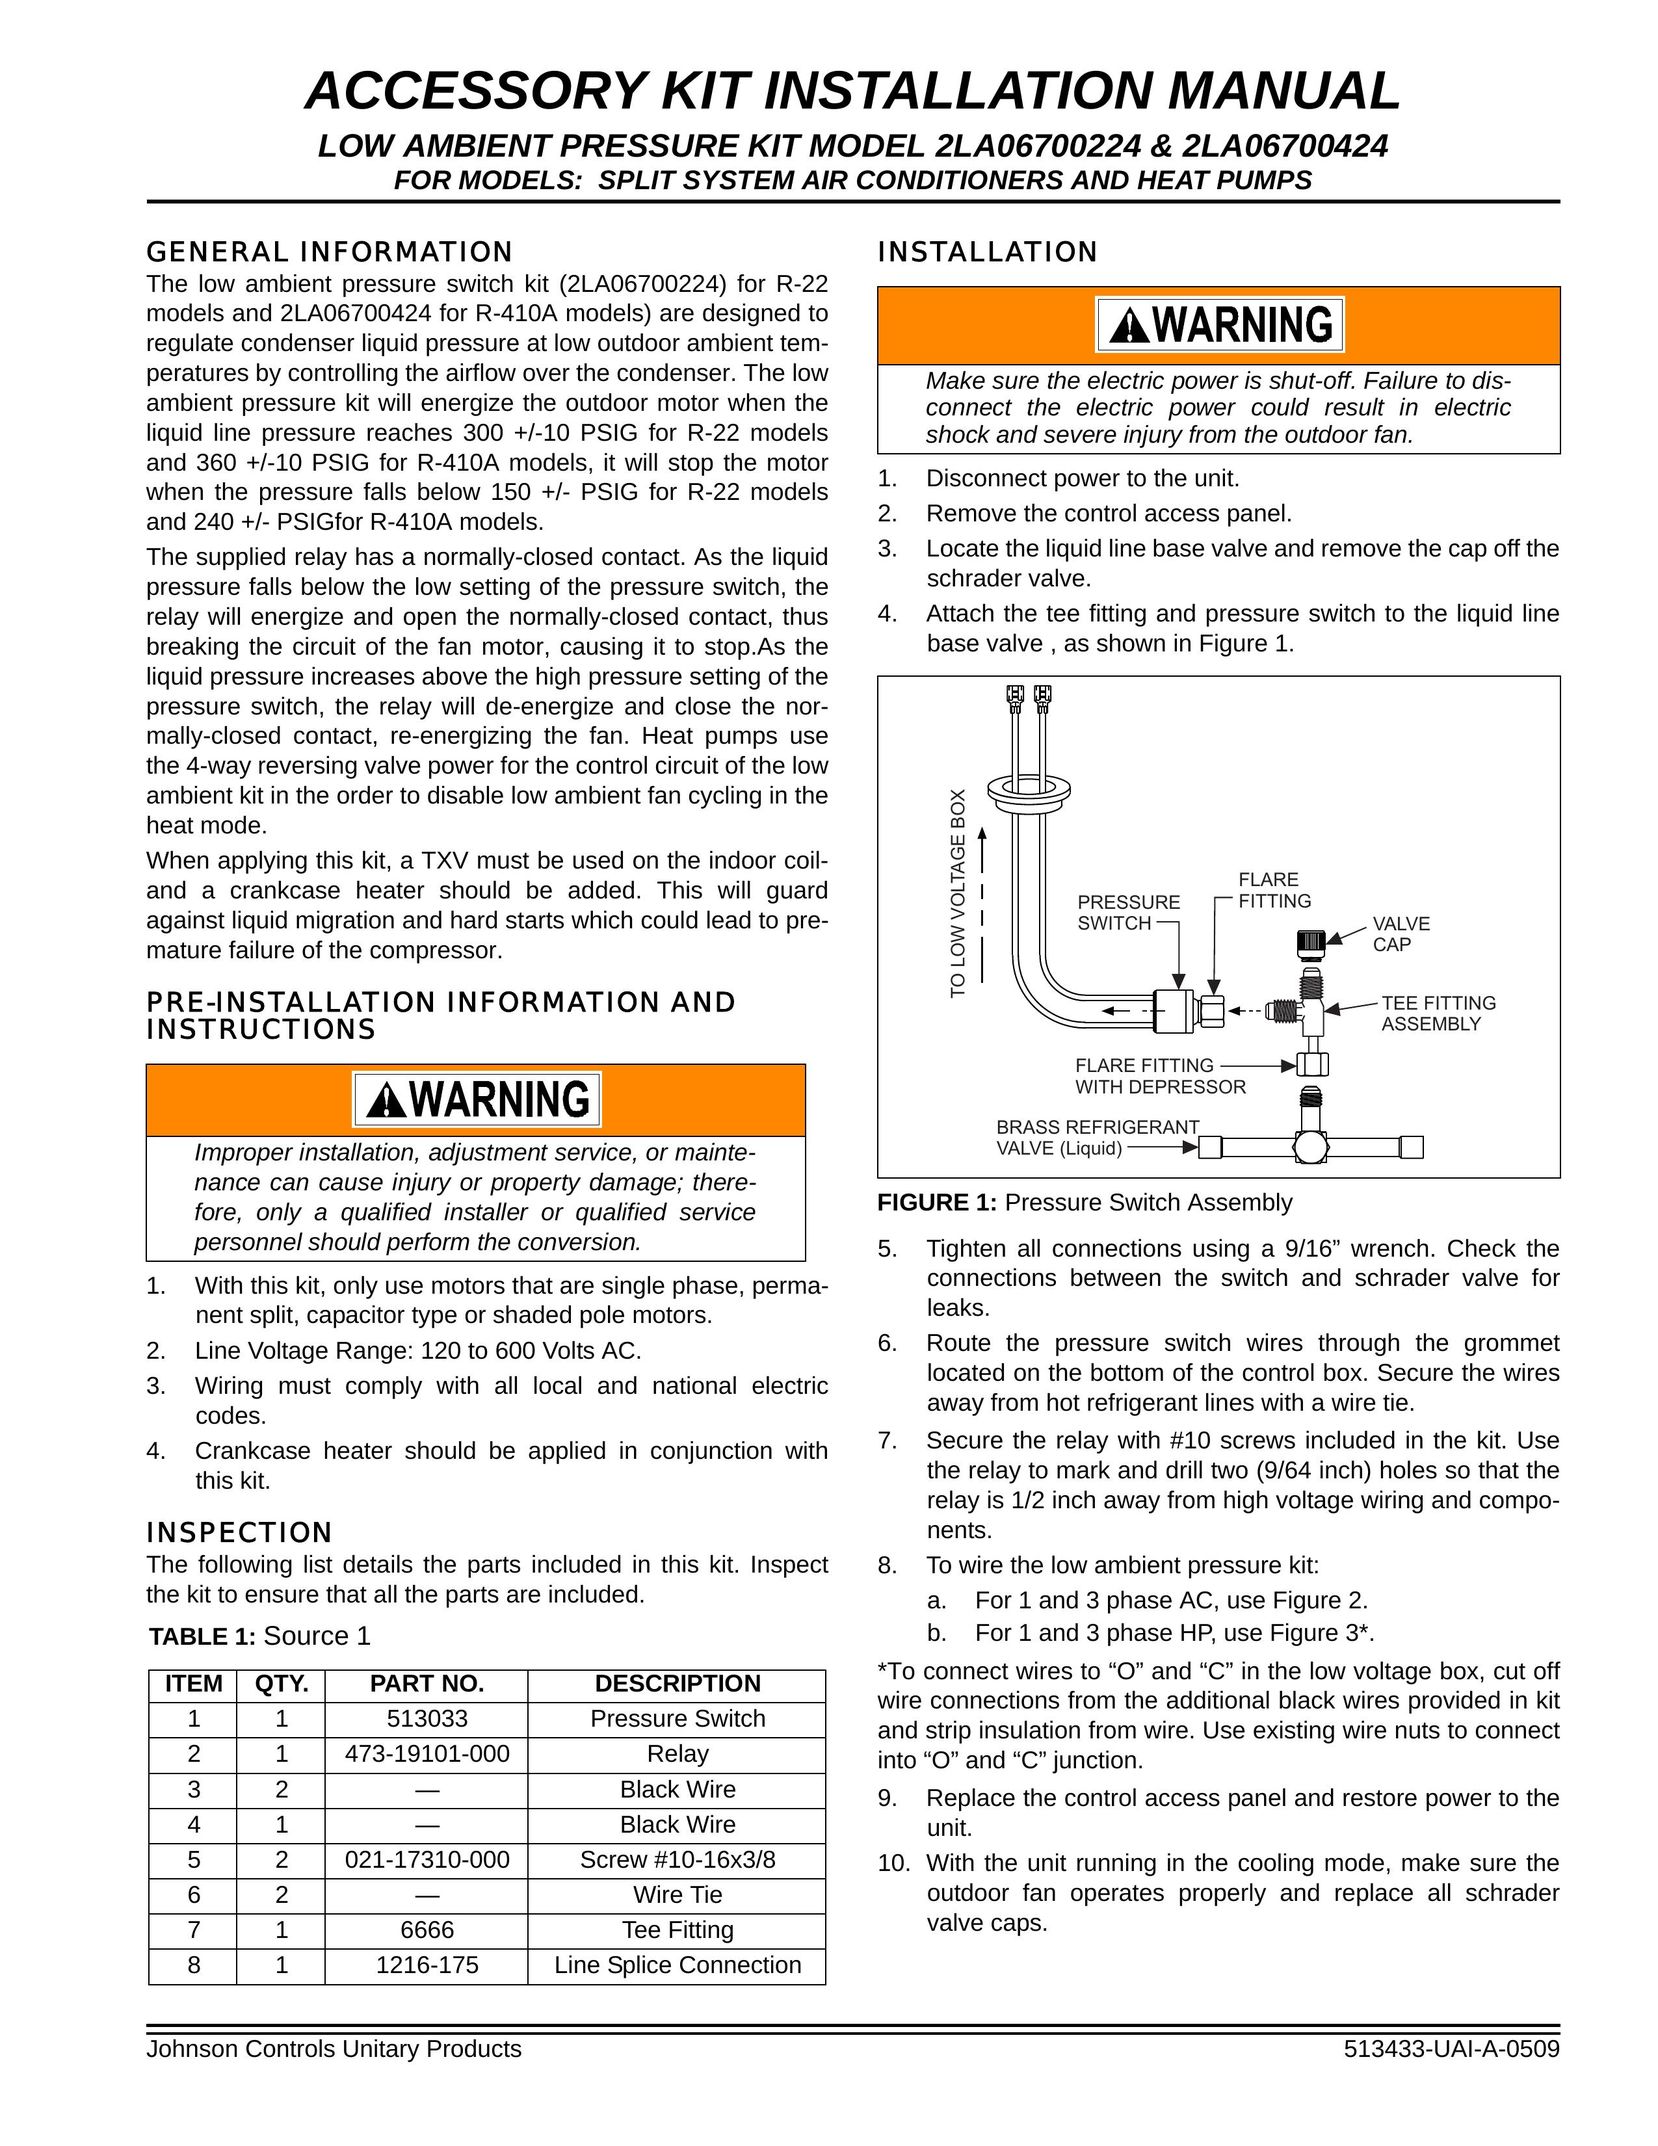 Johnson Controls Low Ambient Pressure Kit Air Conditioner User Manual